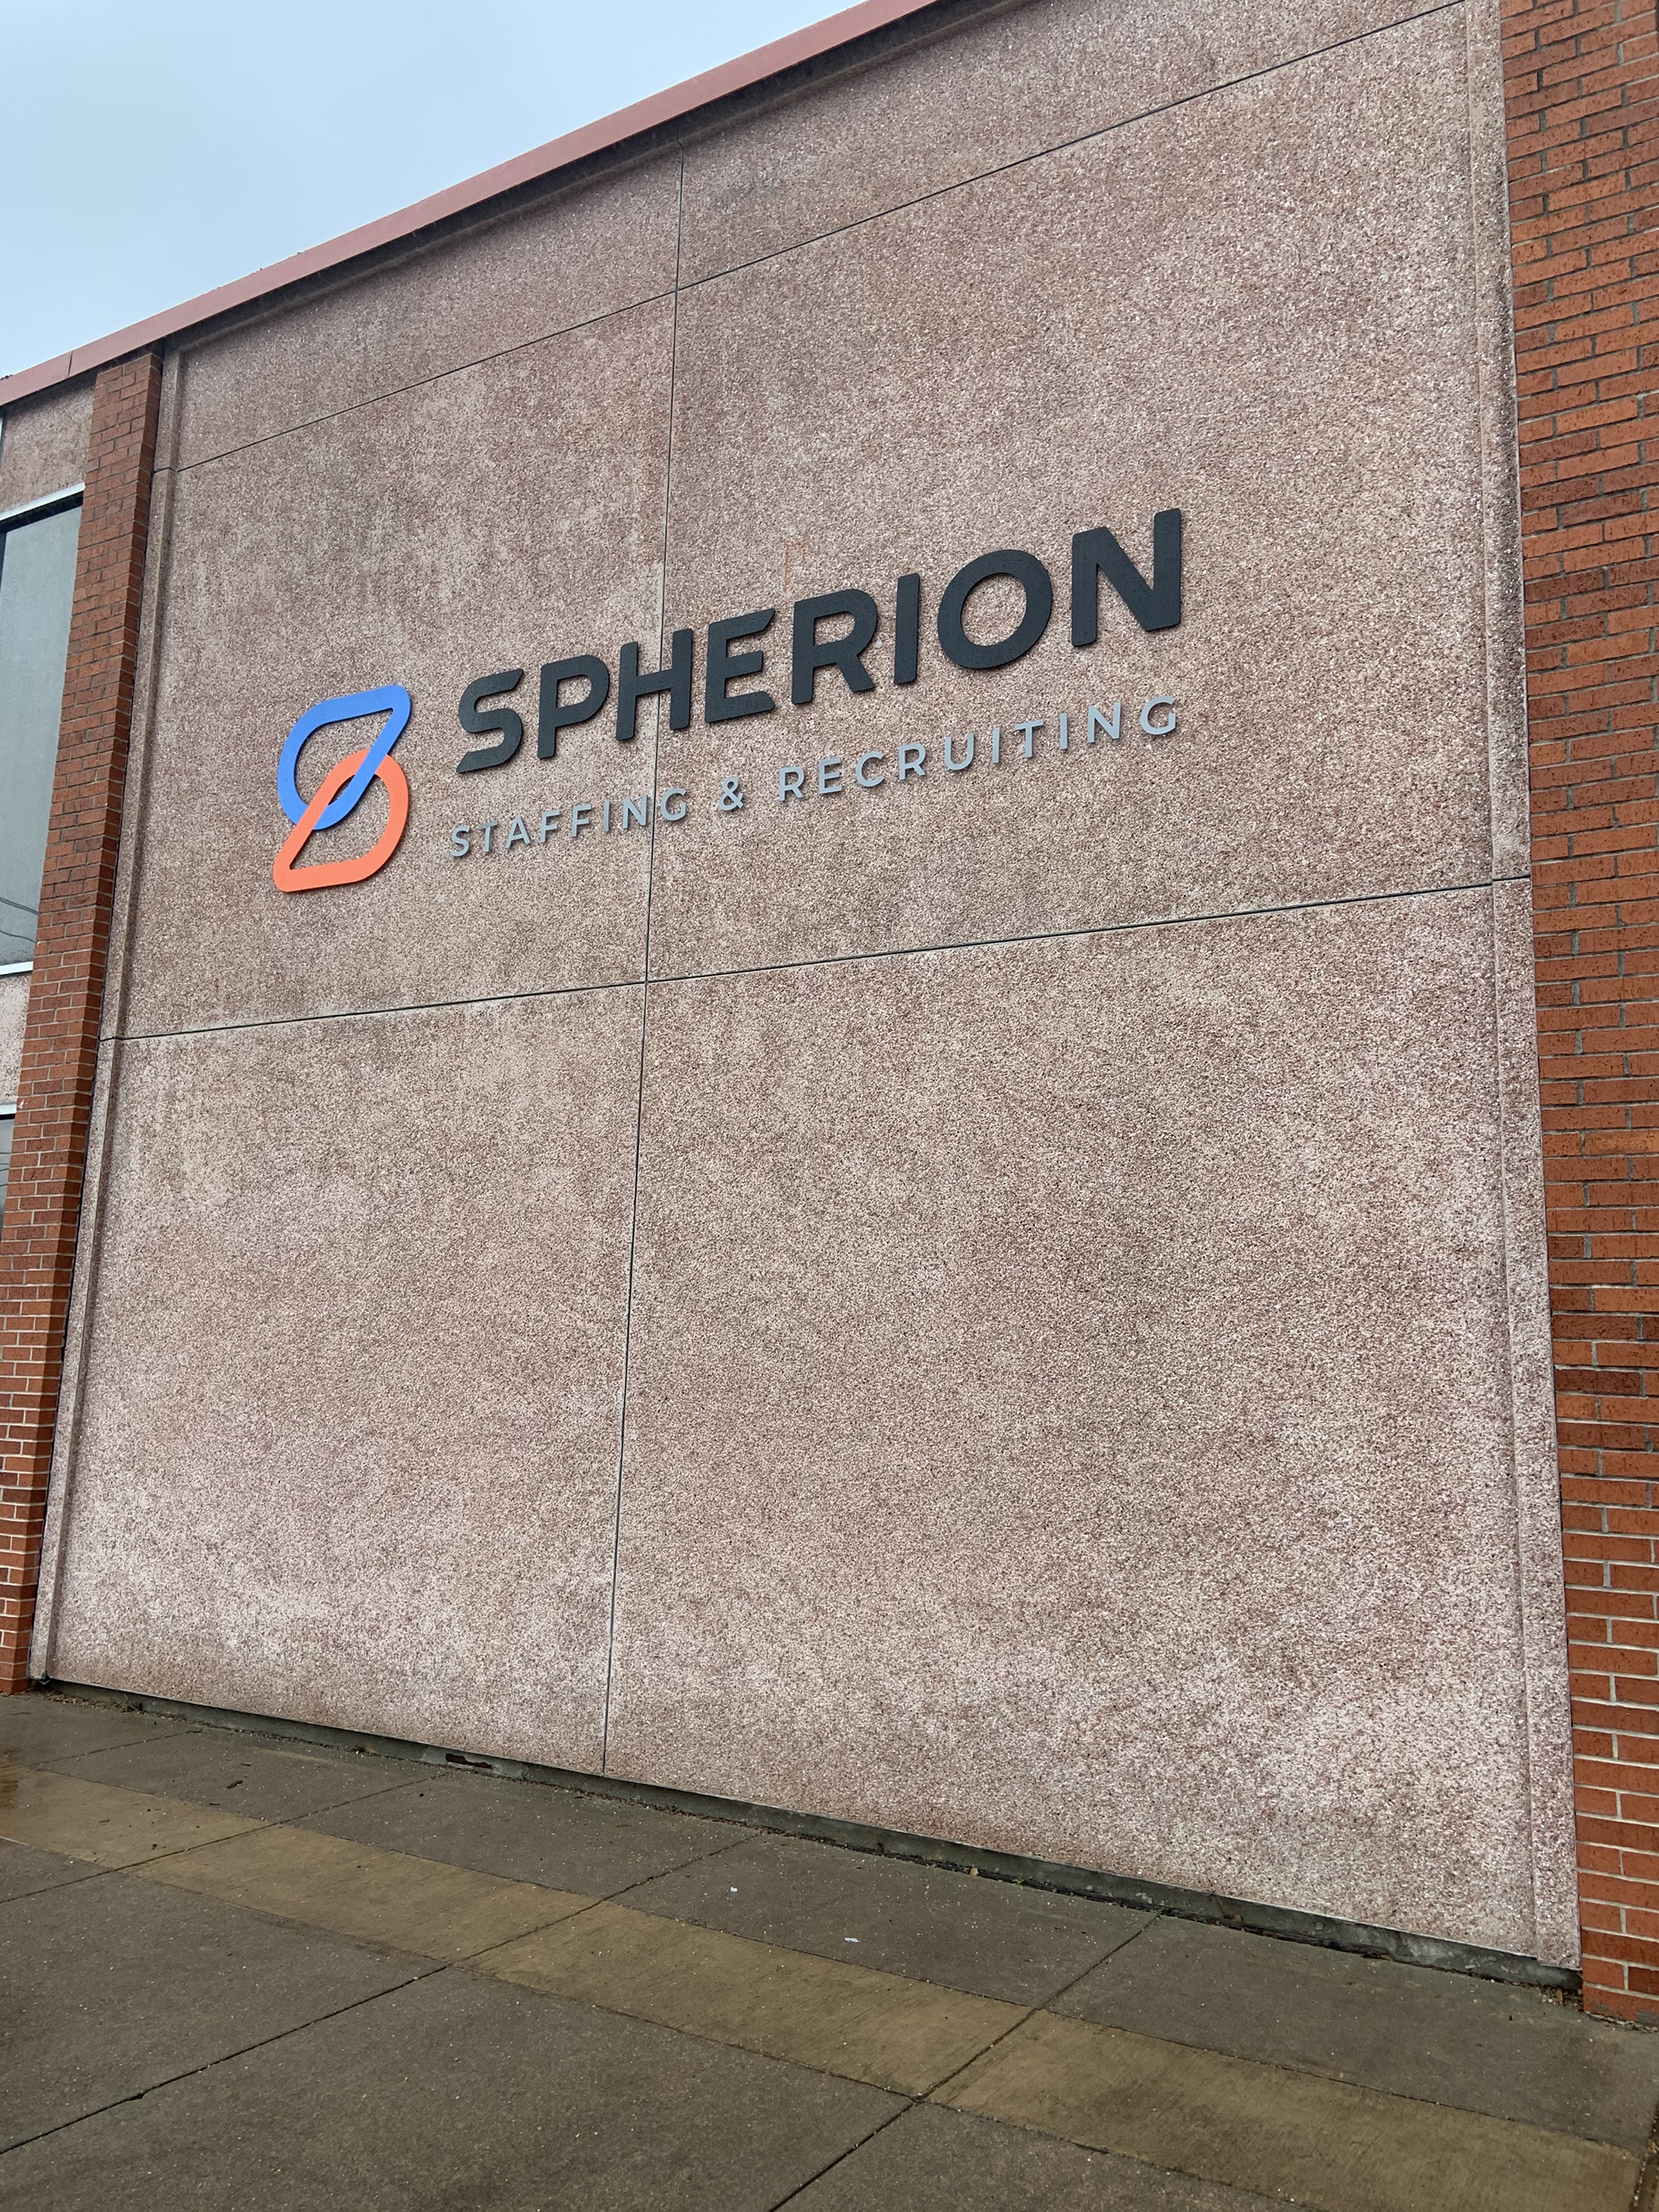 Image for COMMUNITY SPOTLIGHT: Spherion brings staffing and recruitment excellence to League City region